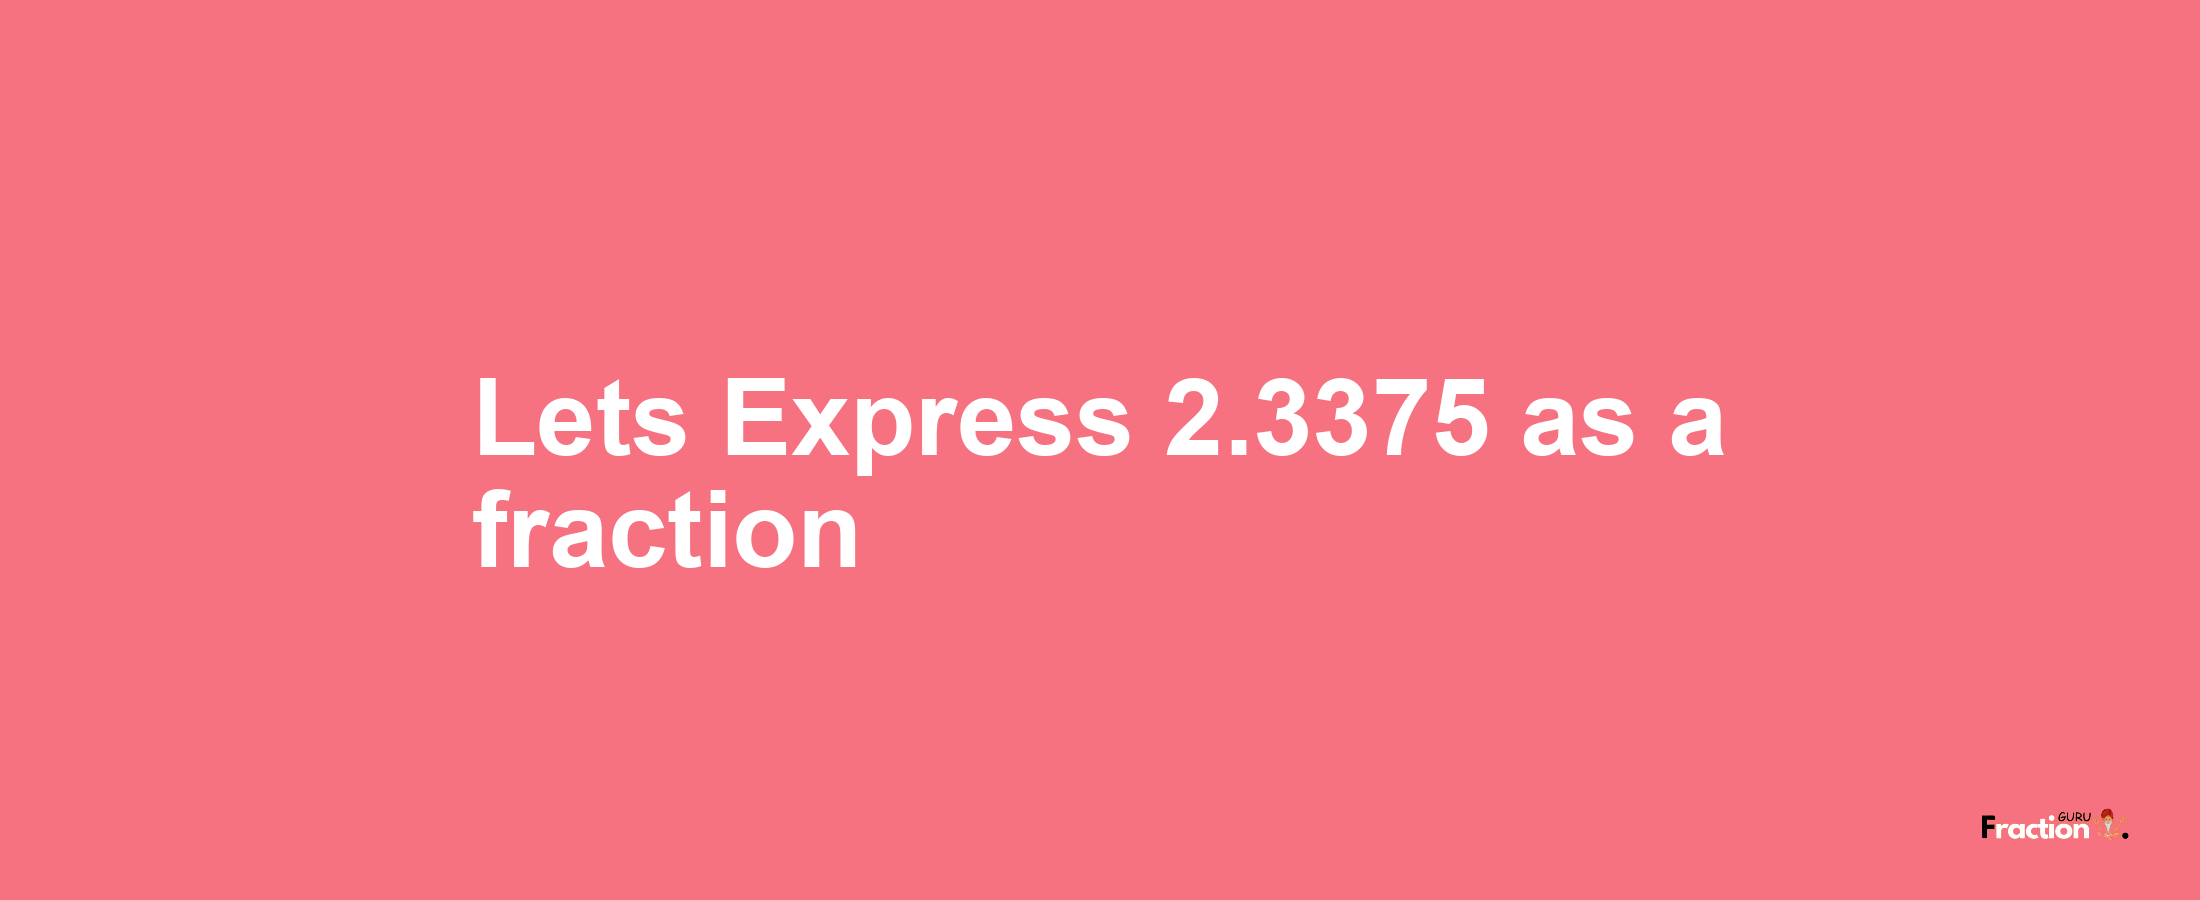 Lets Express 2.3375 as afraction